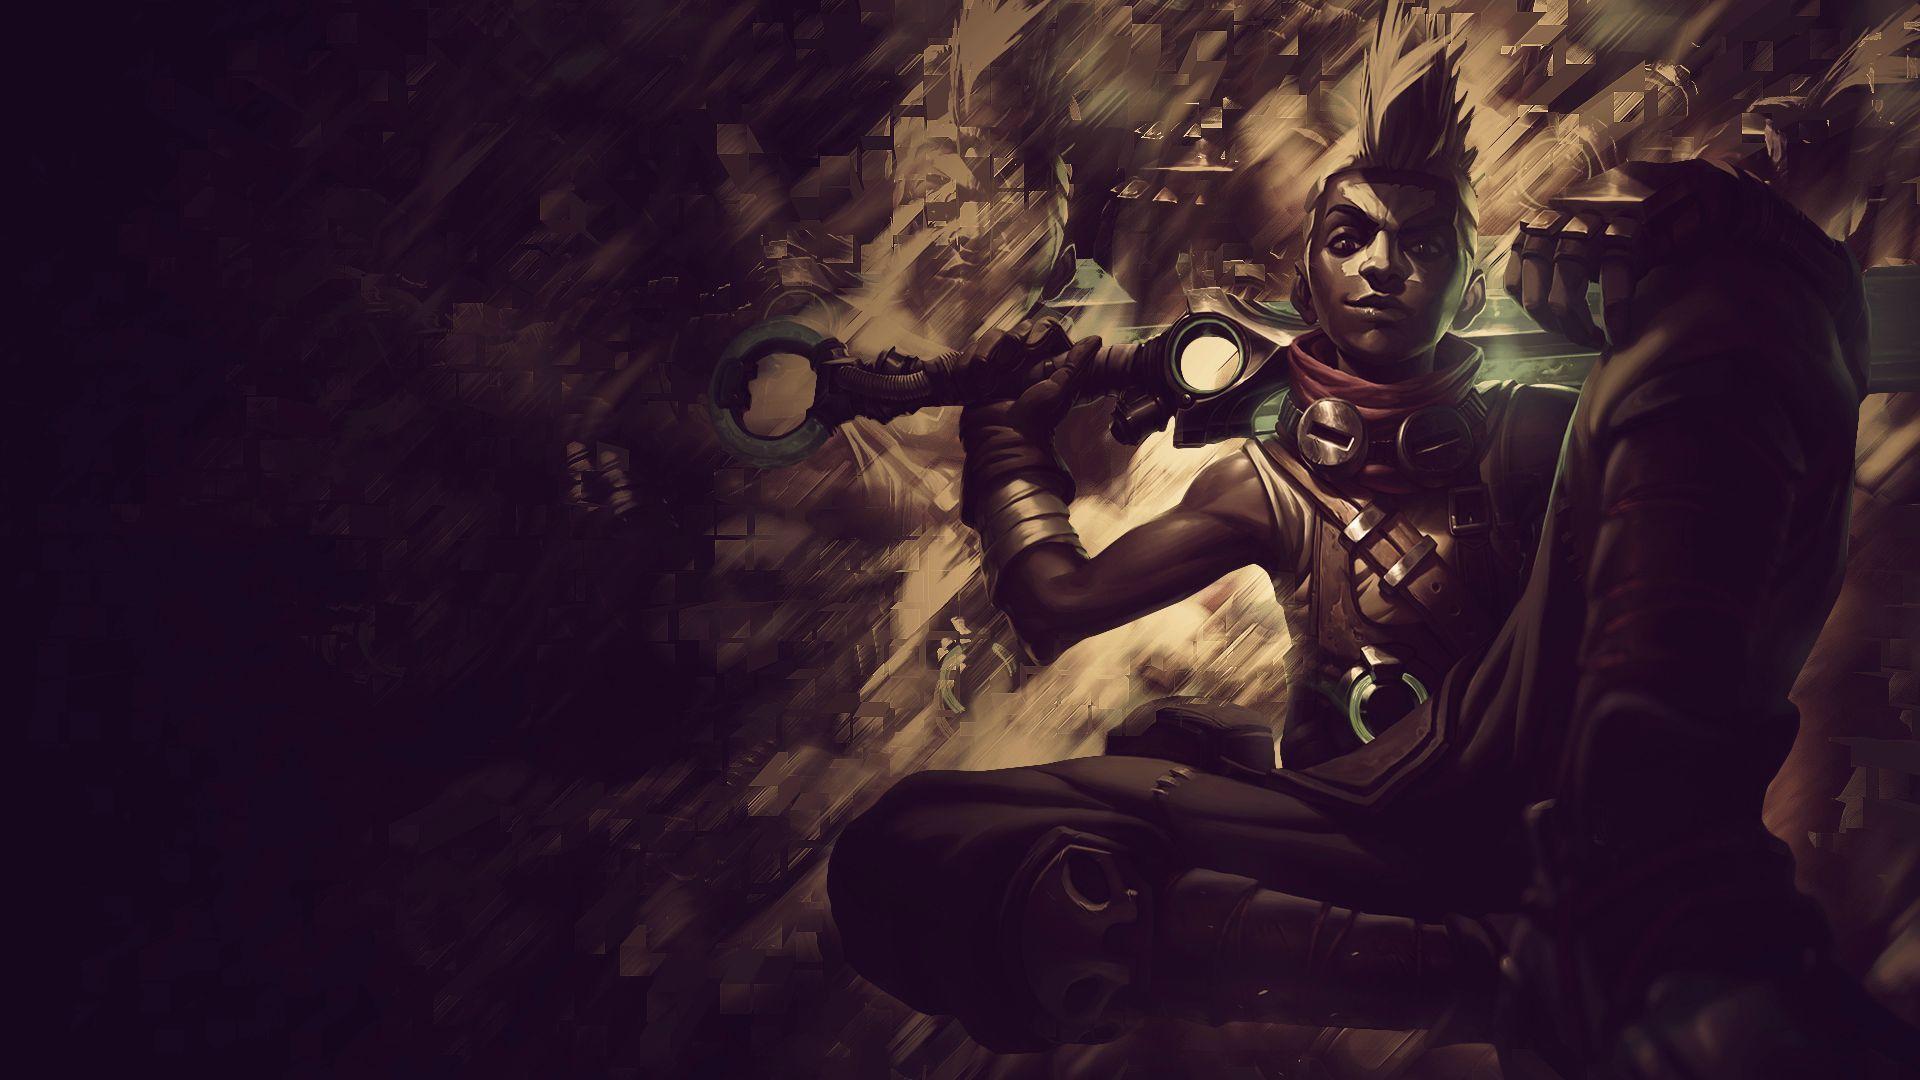 League Of Angels Ekko Splash Art Project Gameplay Hd Wallpaper For Mobile  Phones Tablet And Pc 2560x1440  Wallpapers13com